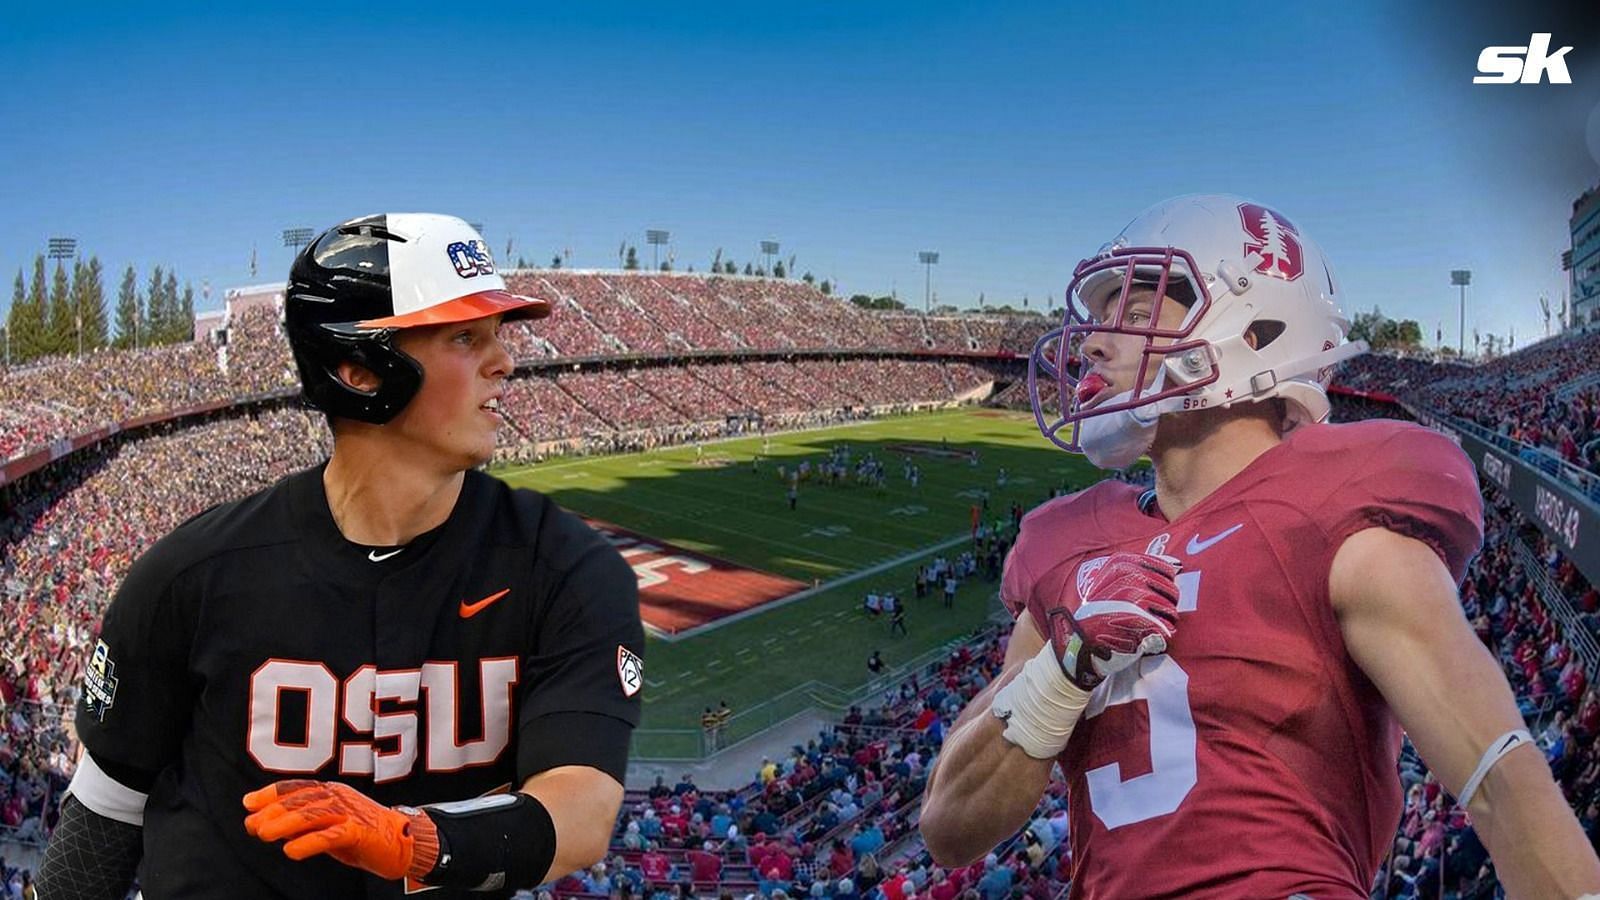 Adley Rutschman of the Baltimore Orioles and Christian McCaffrey of the San Francisco 49ers